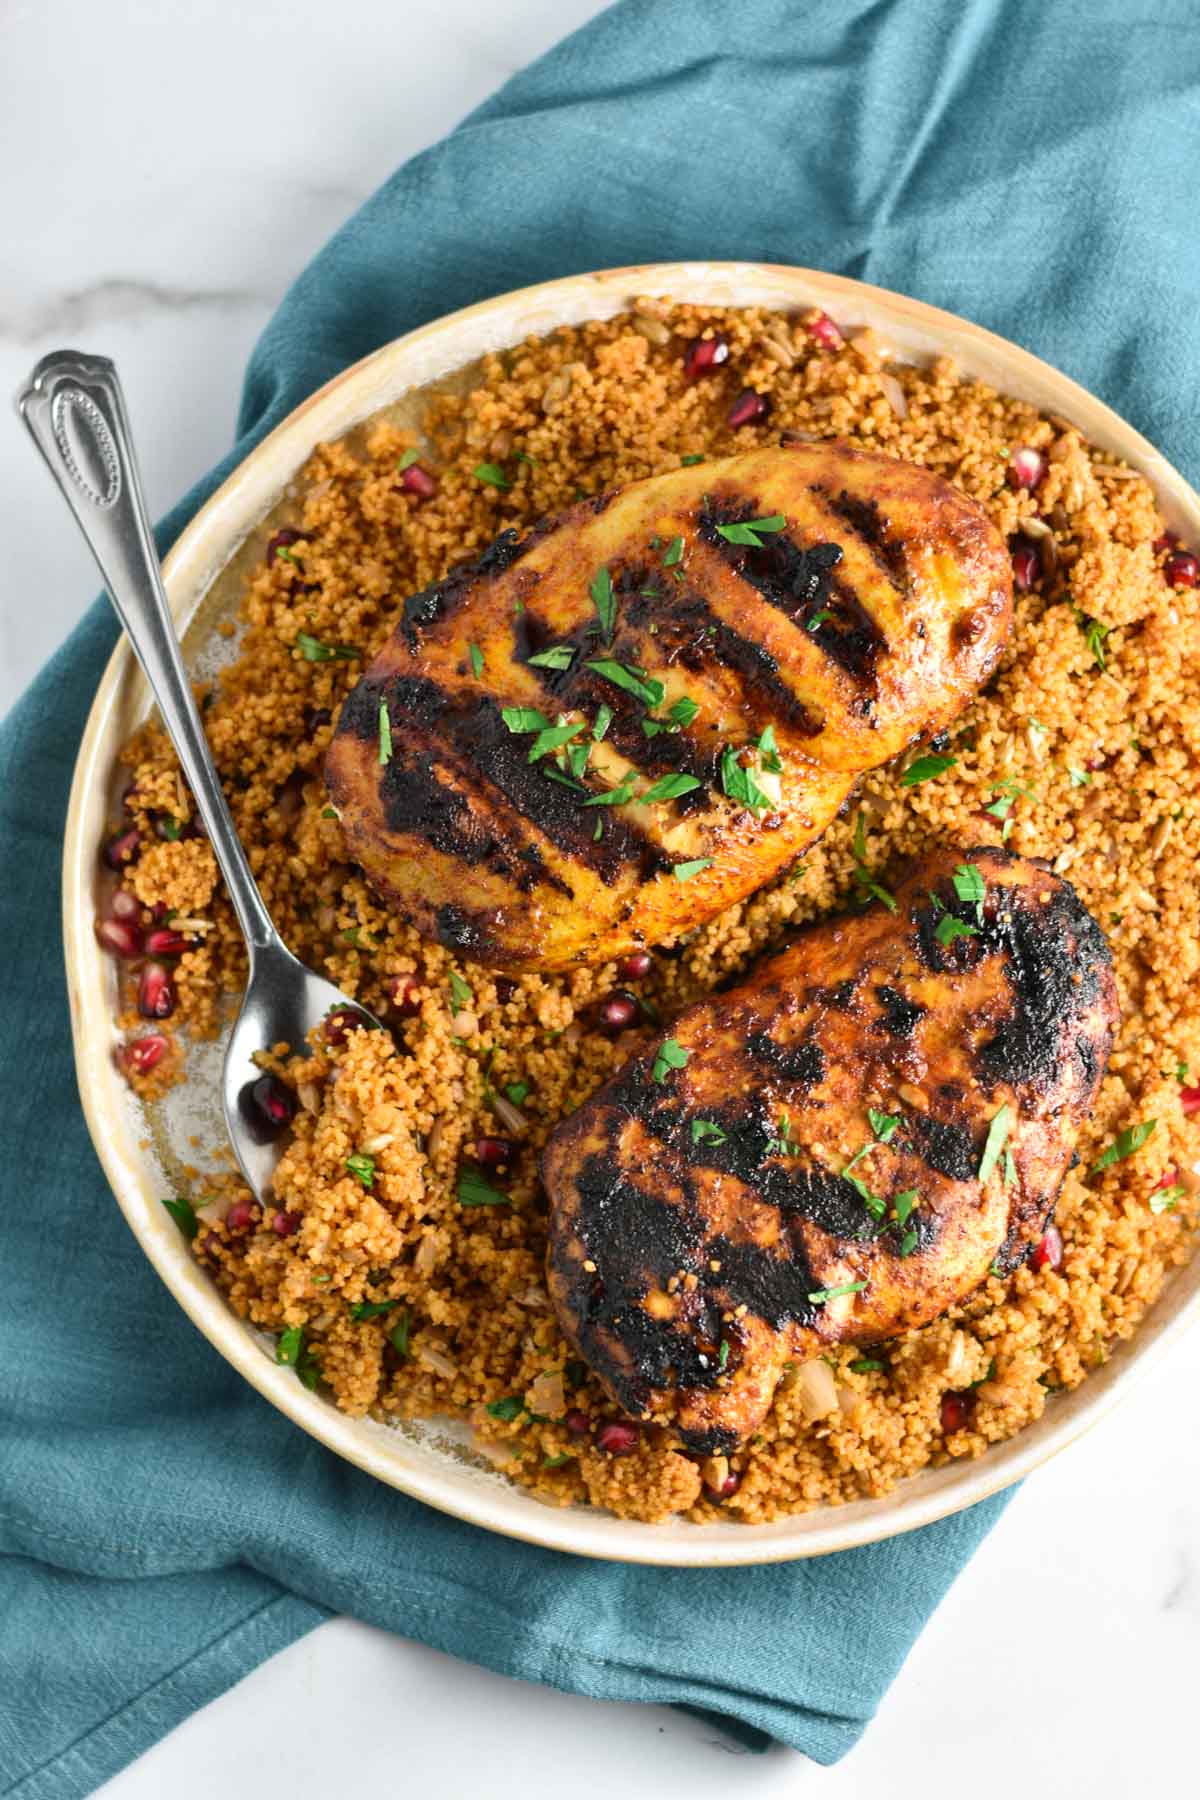 Chicken and couscous on a plate with a spoon.